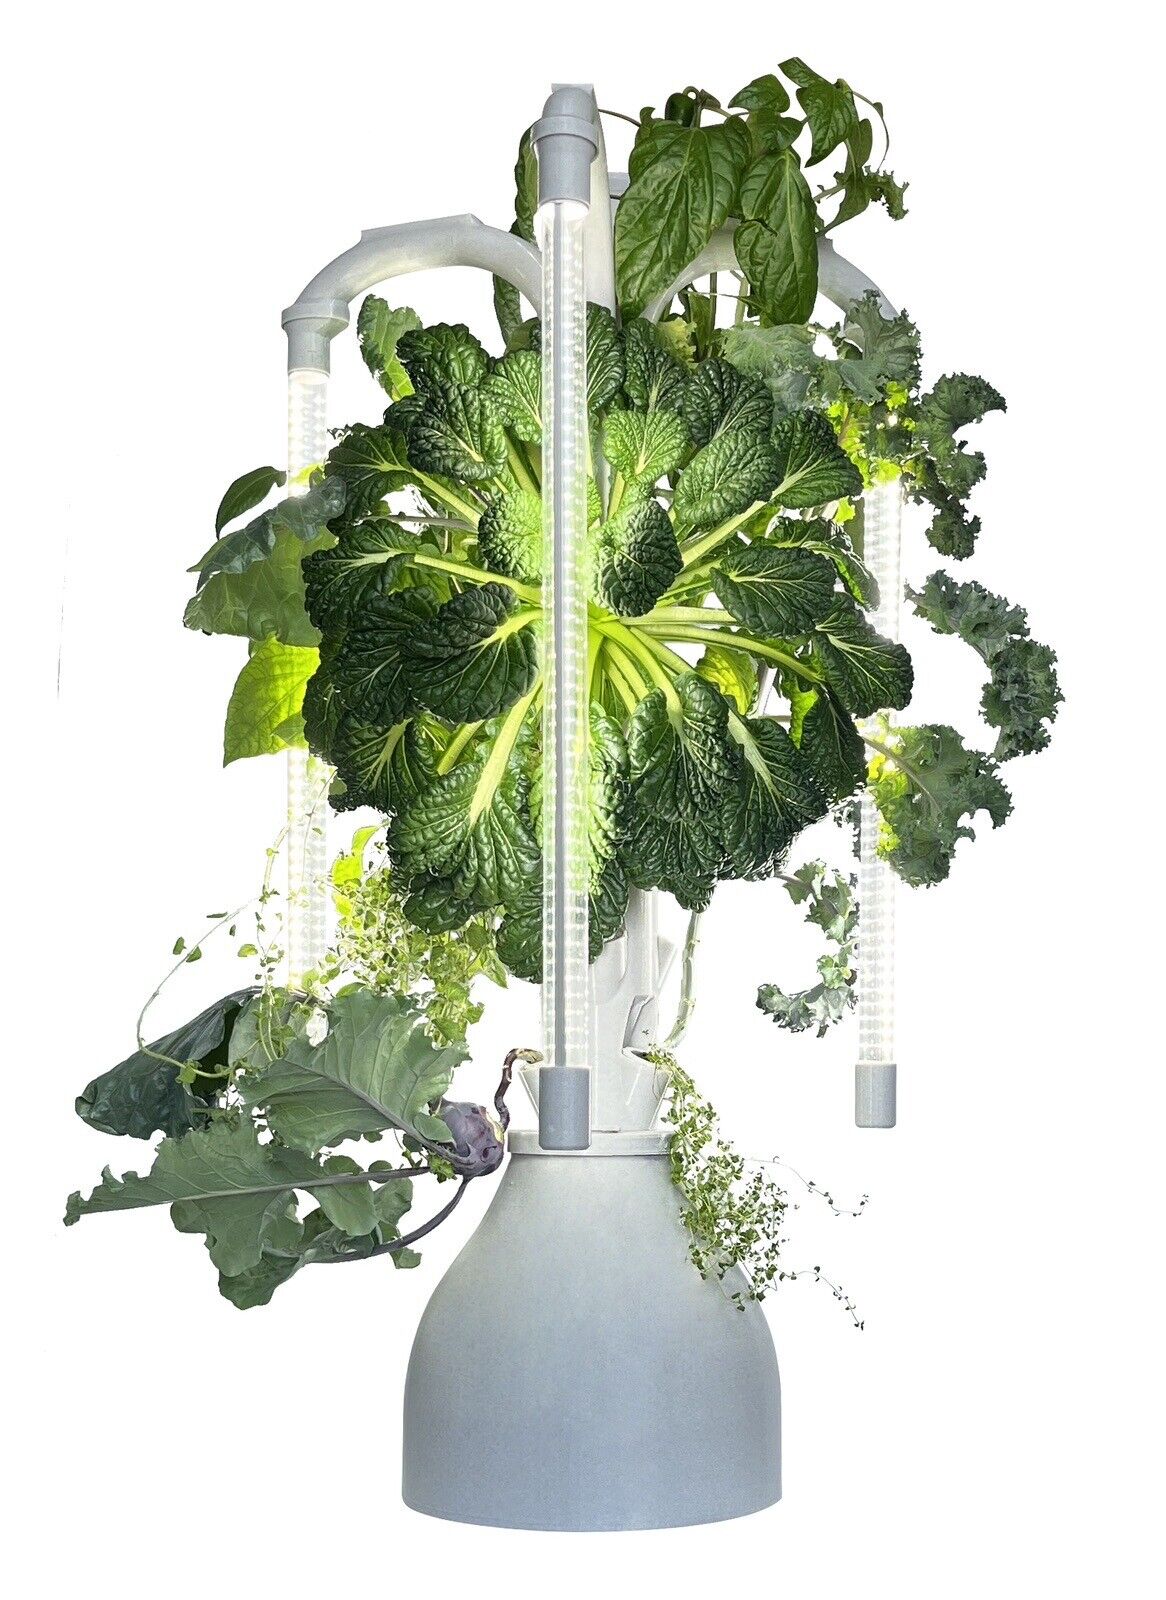 The Hydro Tower® Hydroponic Tower with Integrated Lighting and Watering Systems